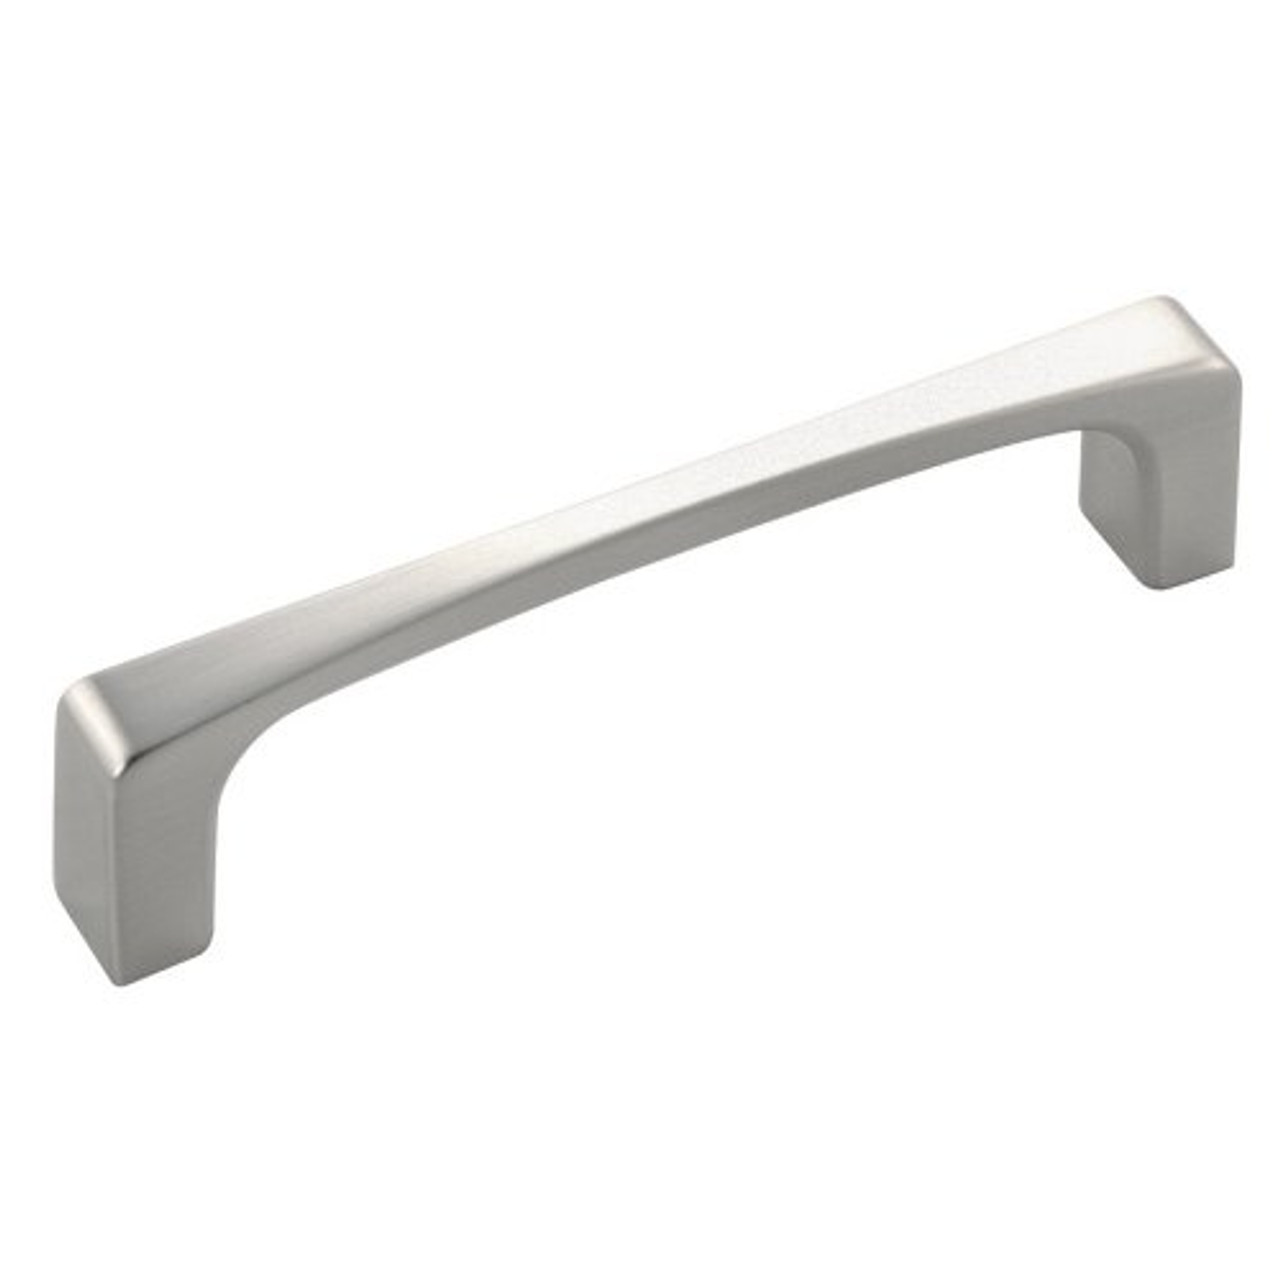 Hickory Hardware 3-3/4 INCH (96MM) ROCHESTER SLEEK BAR CABINET PULL